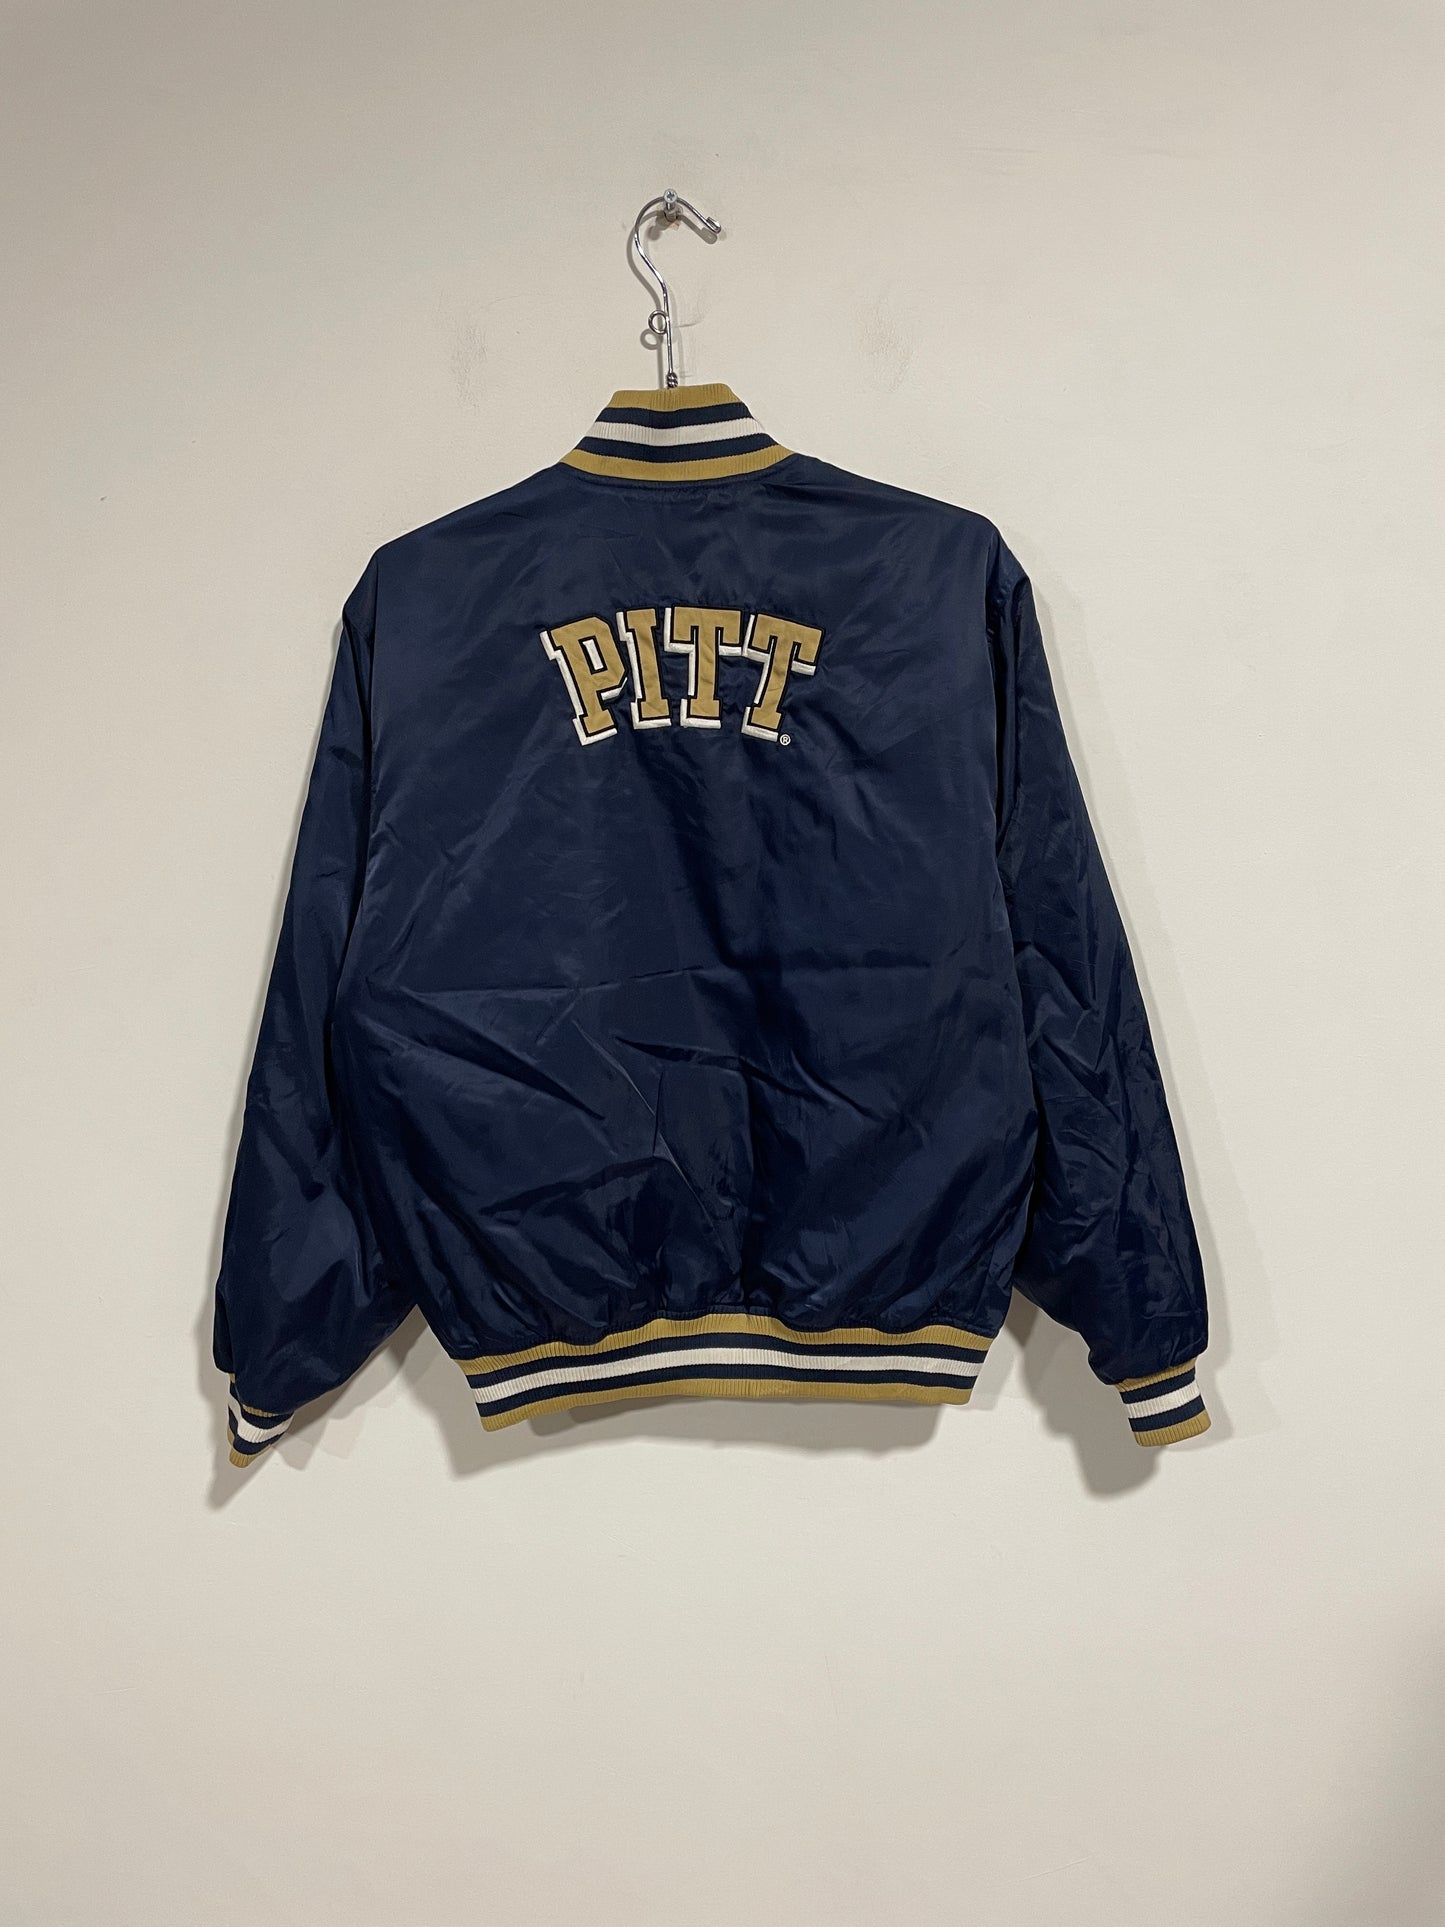 Bomber college Pittsburgh (C524)